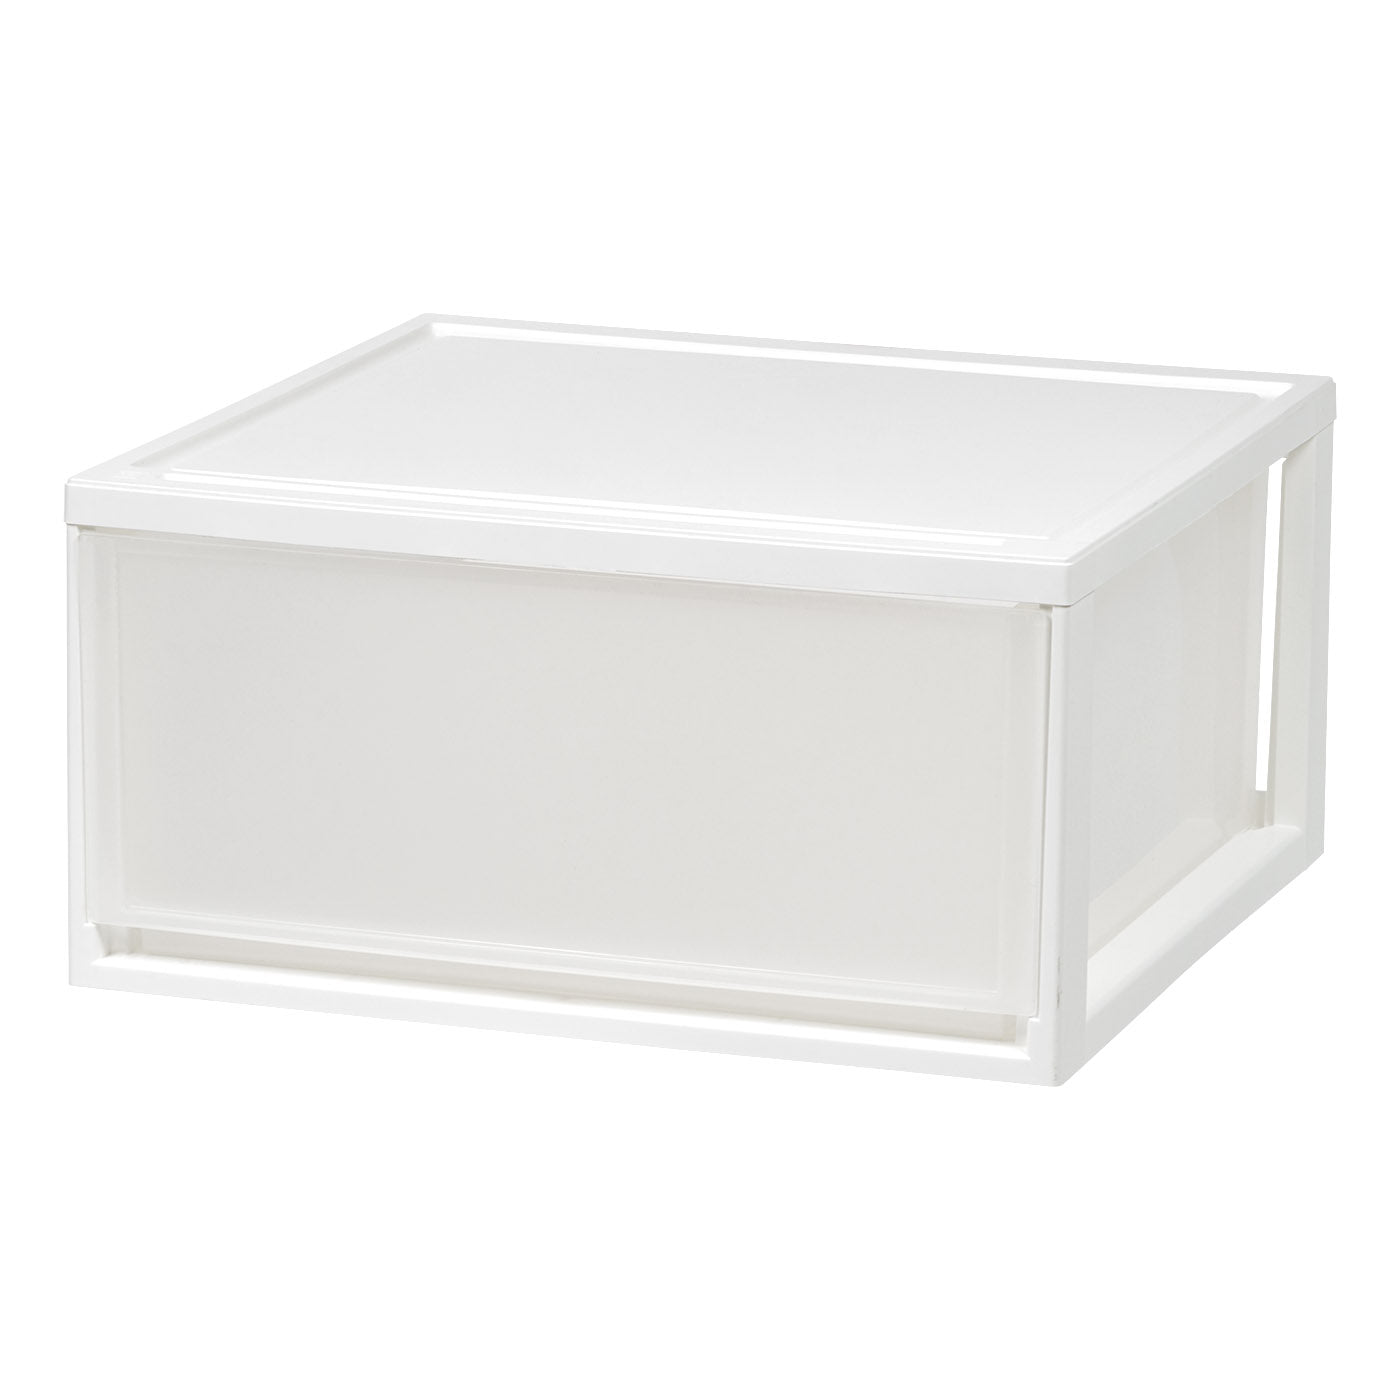 IRIS USA MSD-3 Compact Stacking, Stackable Plastic Drawer Unit, 47 Quart, White, 2 Count